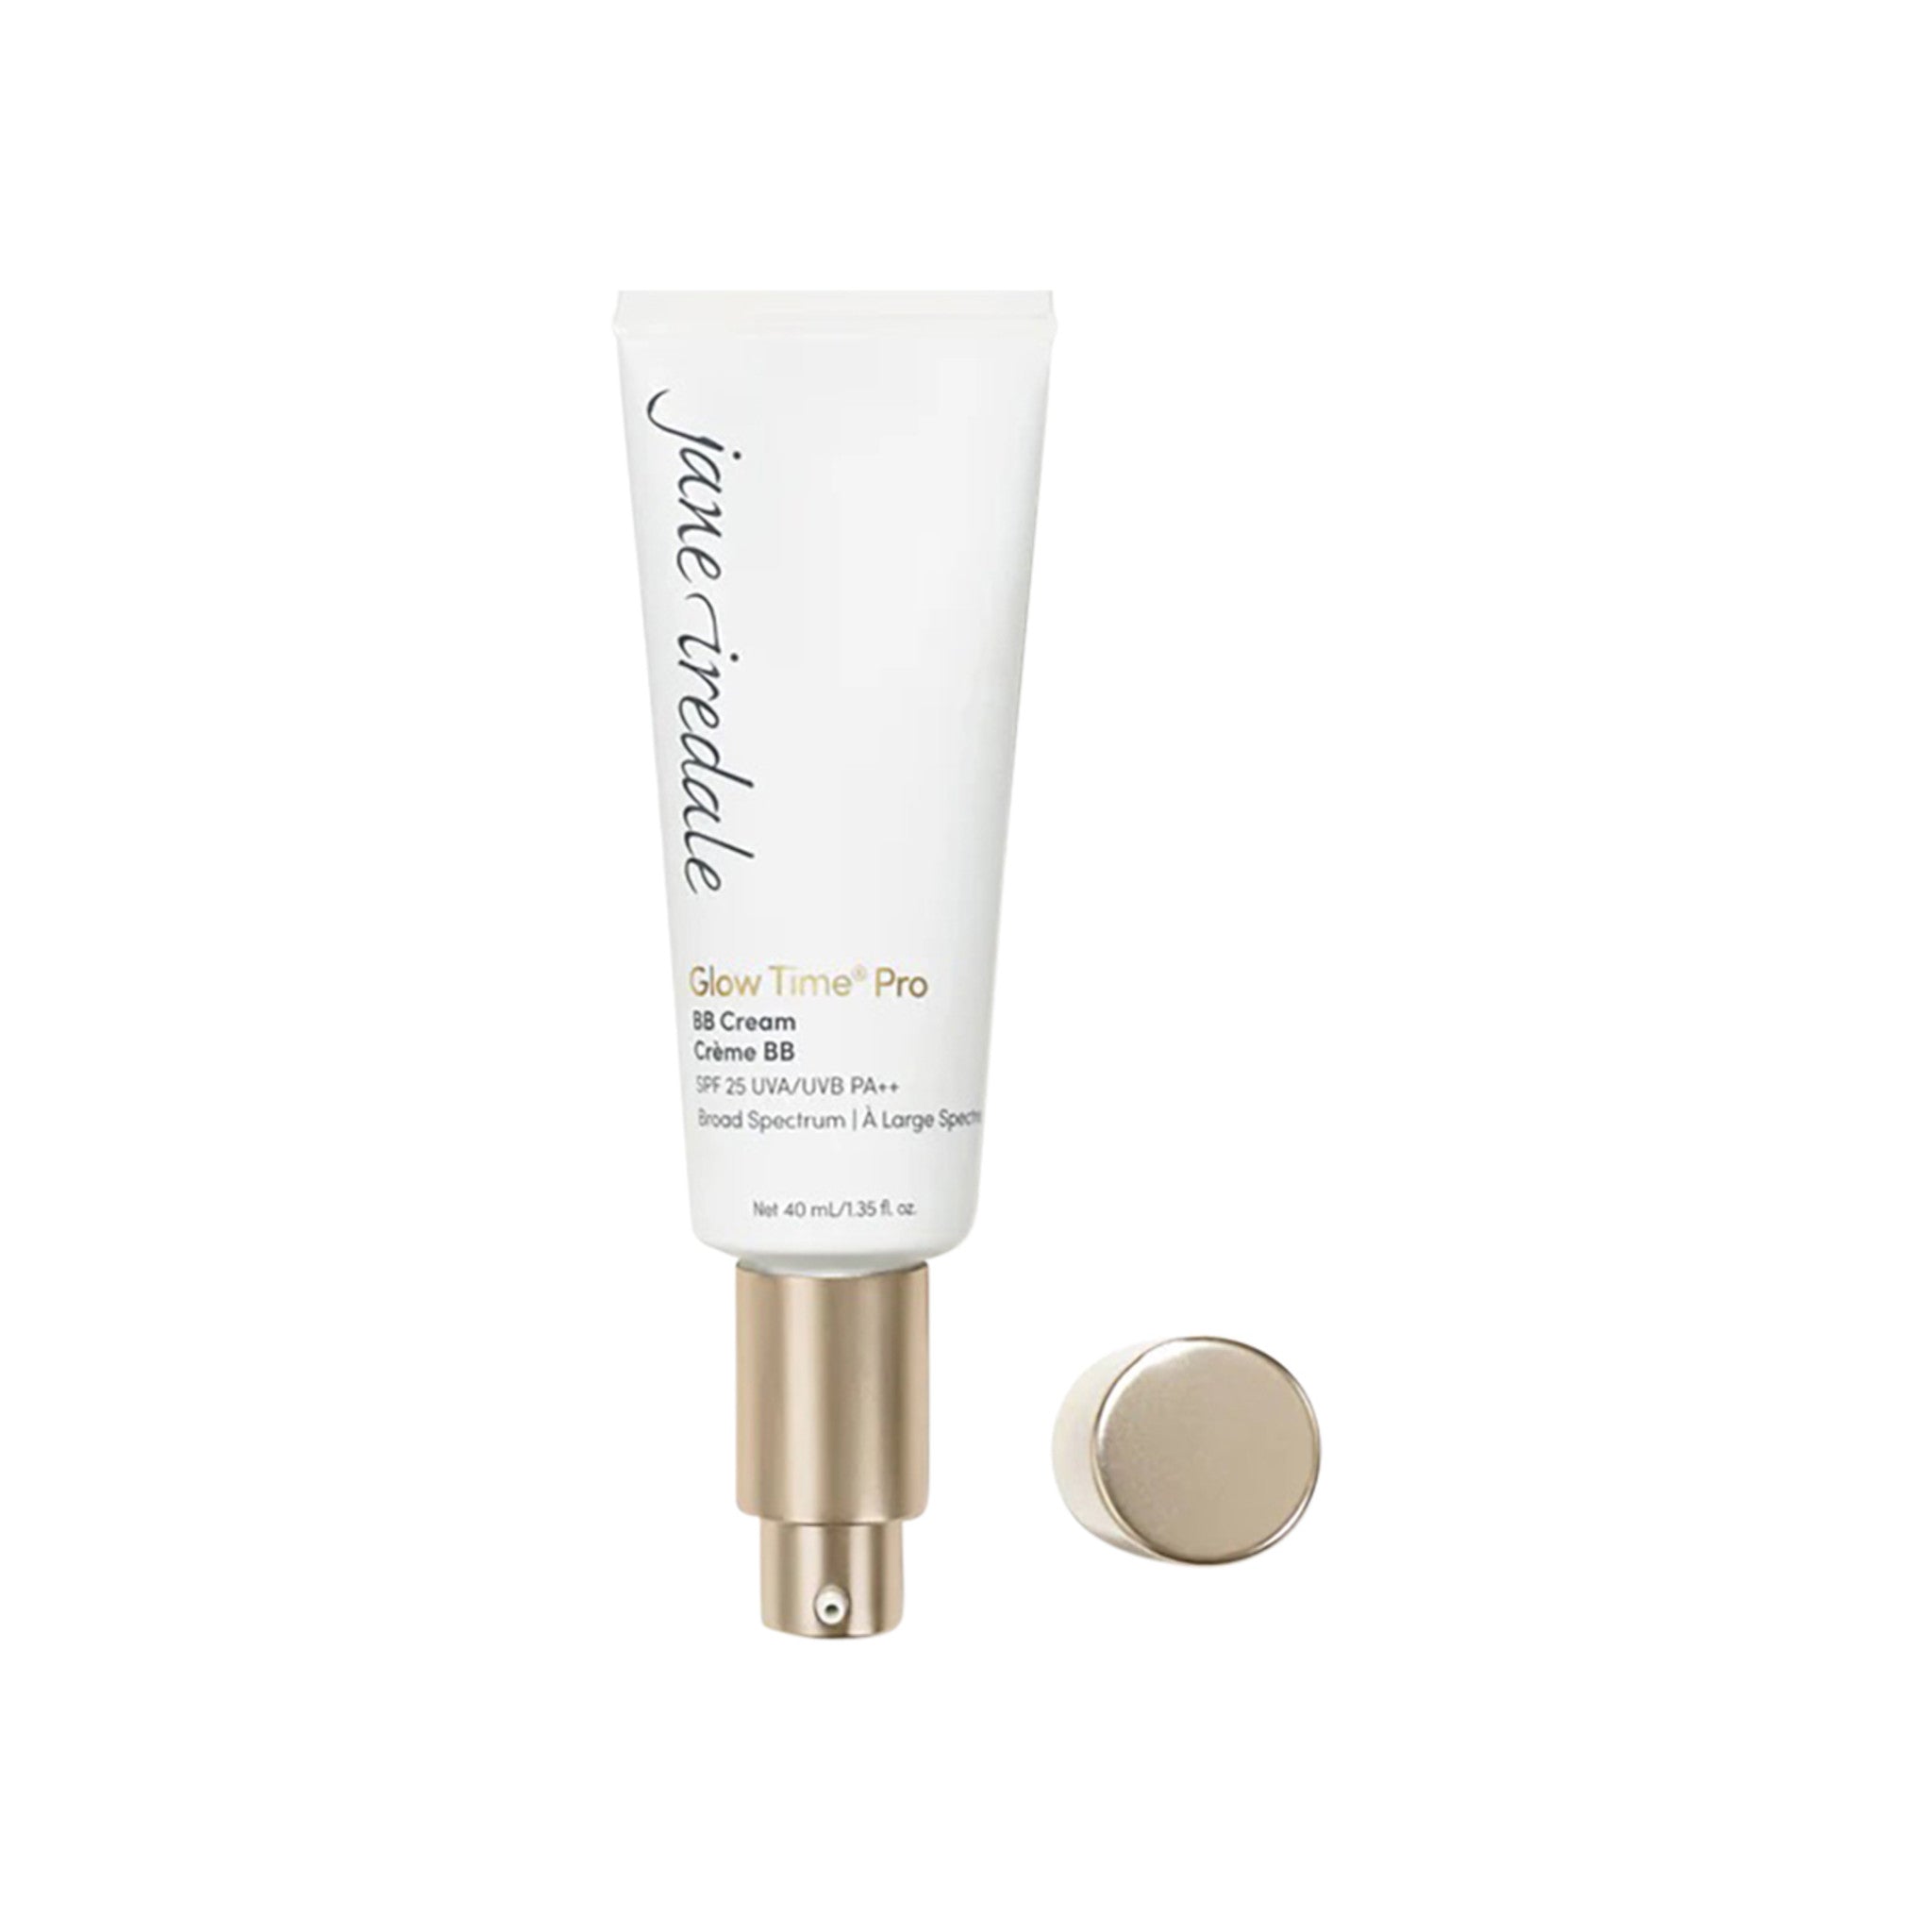 Jane Iredale Glow Time Pro BB Cream SPF 25 Color/Shade variant: GT1 main image. This product is for light complexions